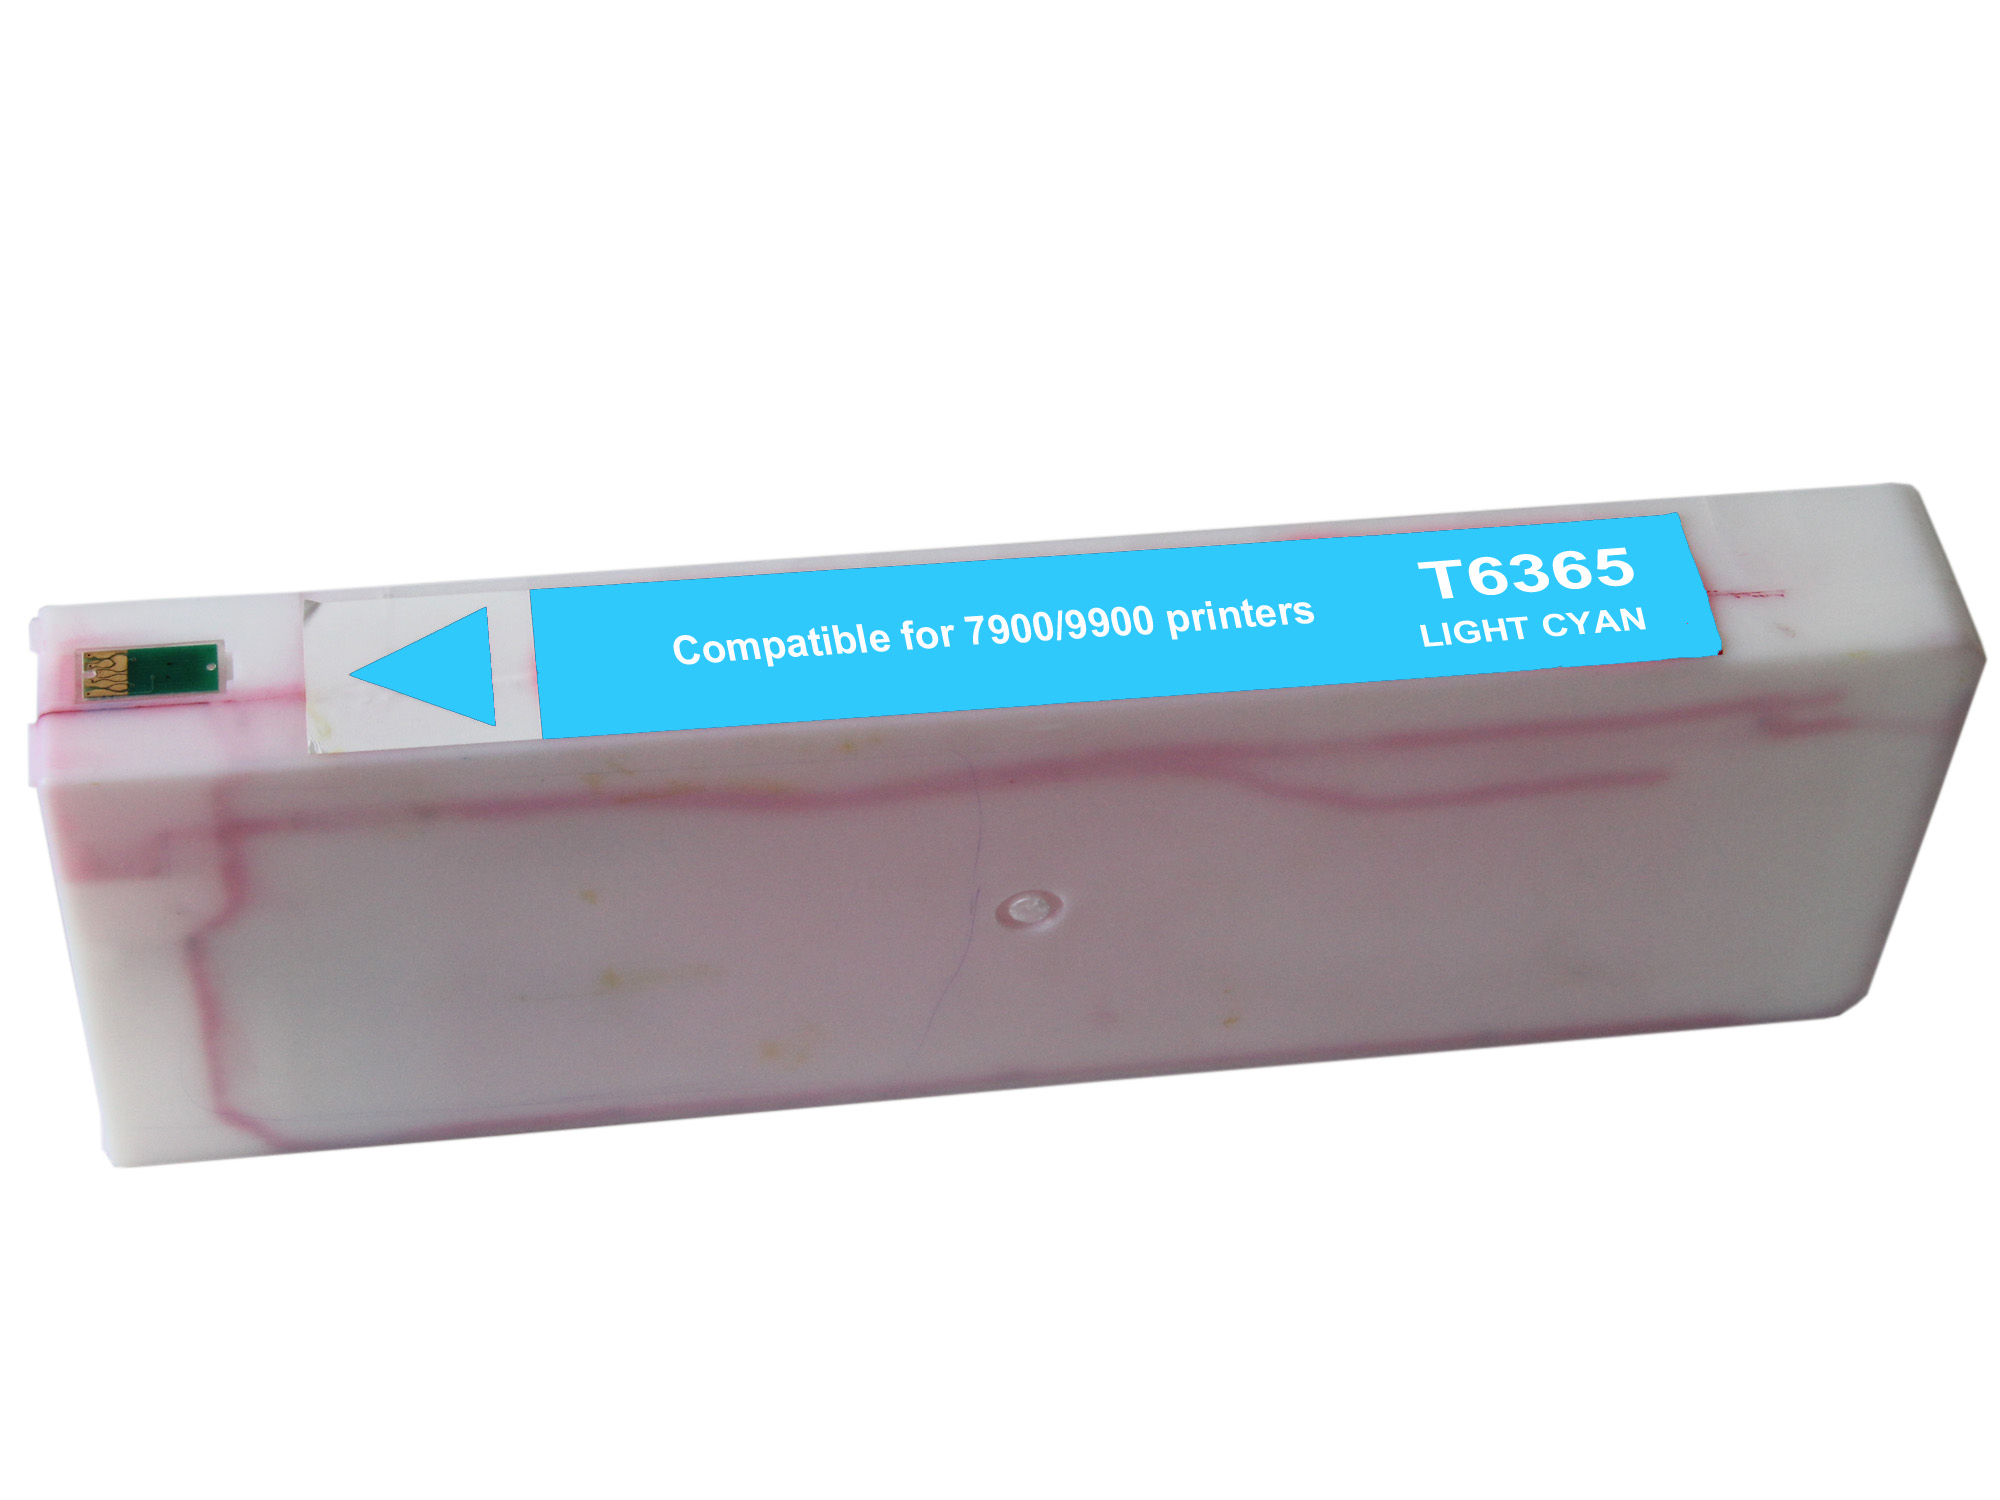 Premium Quality Light Cyan UltraChrome HDR Ink Cartridge compatible with Epson T636500